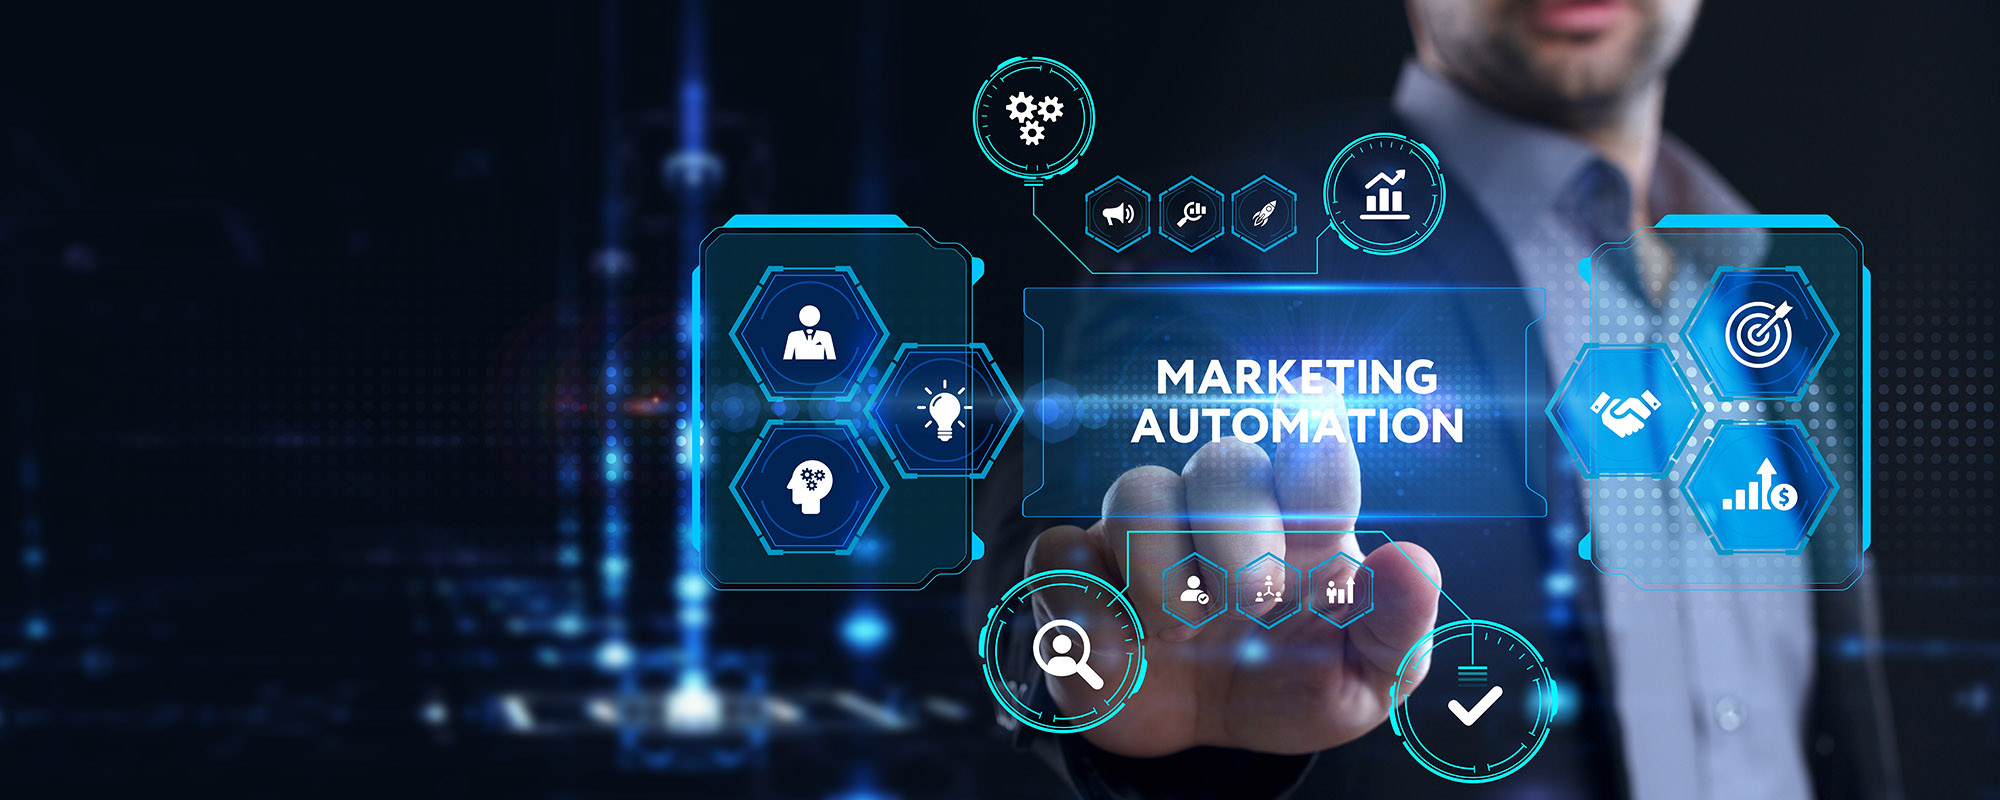 The Growing Importance of Marketing Automation